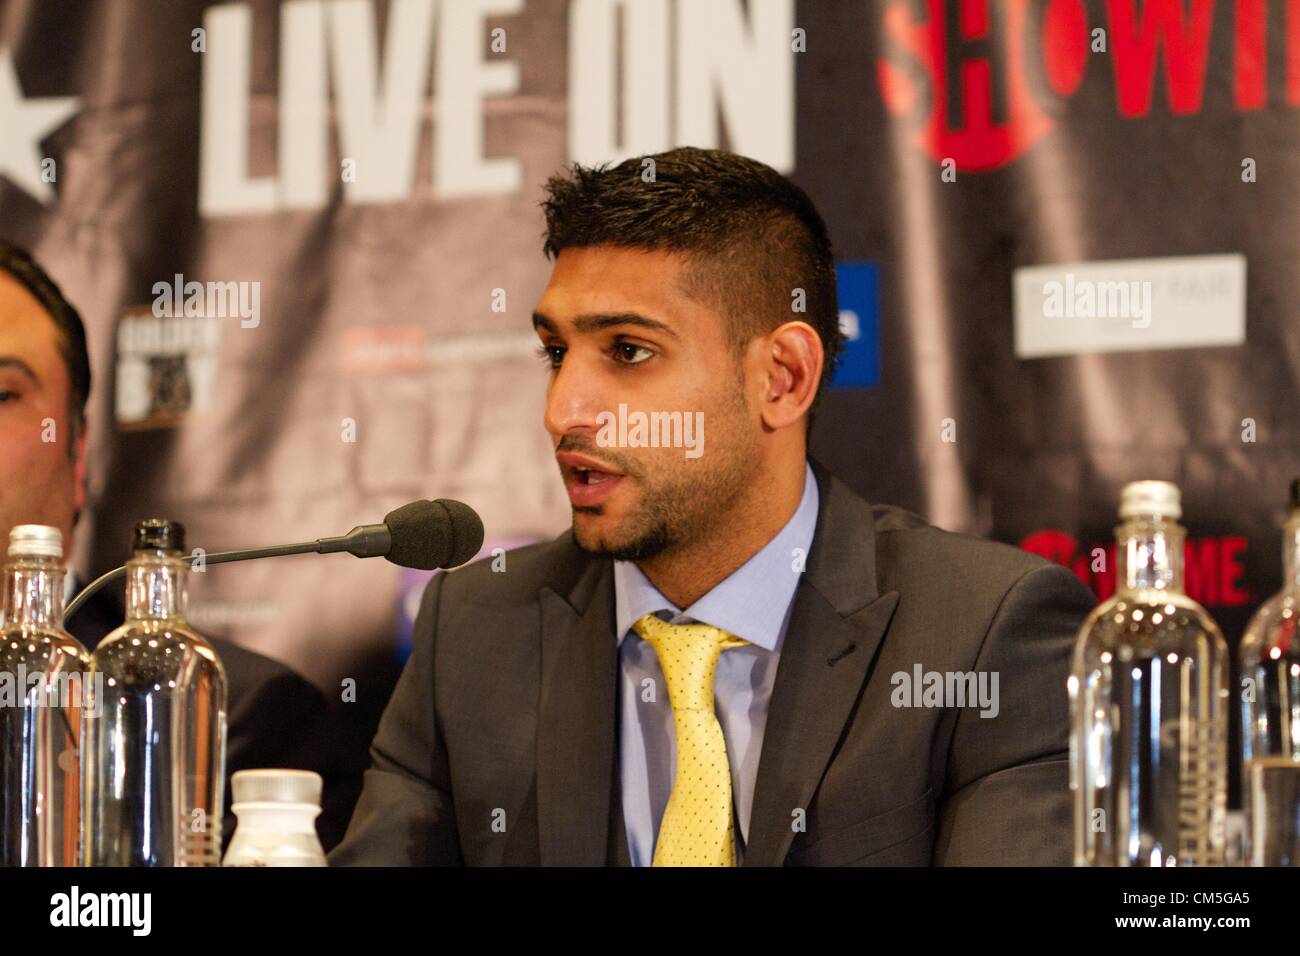 London, UK. 9th October 2012. Boxer Amir Khan speaks at the Mayfair Hotel in London on Tuesday October 9, 2012 to promote his December 15 bout against Carlos Molina in Los Angeles.  Credit:  Paul McCabe / Alamy Live News Stock Photo